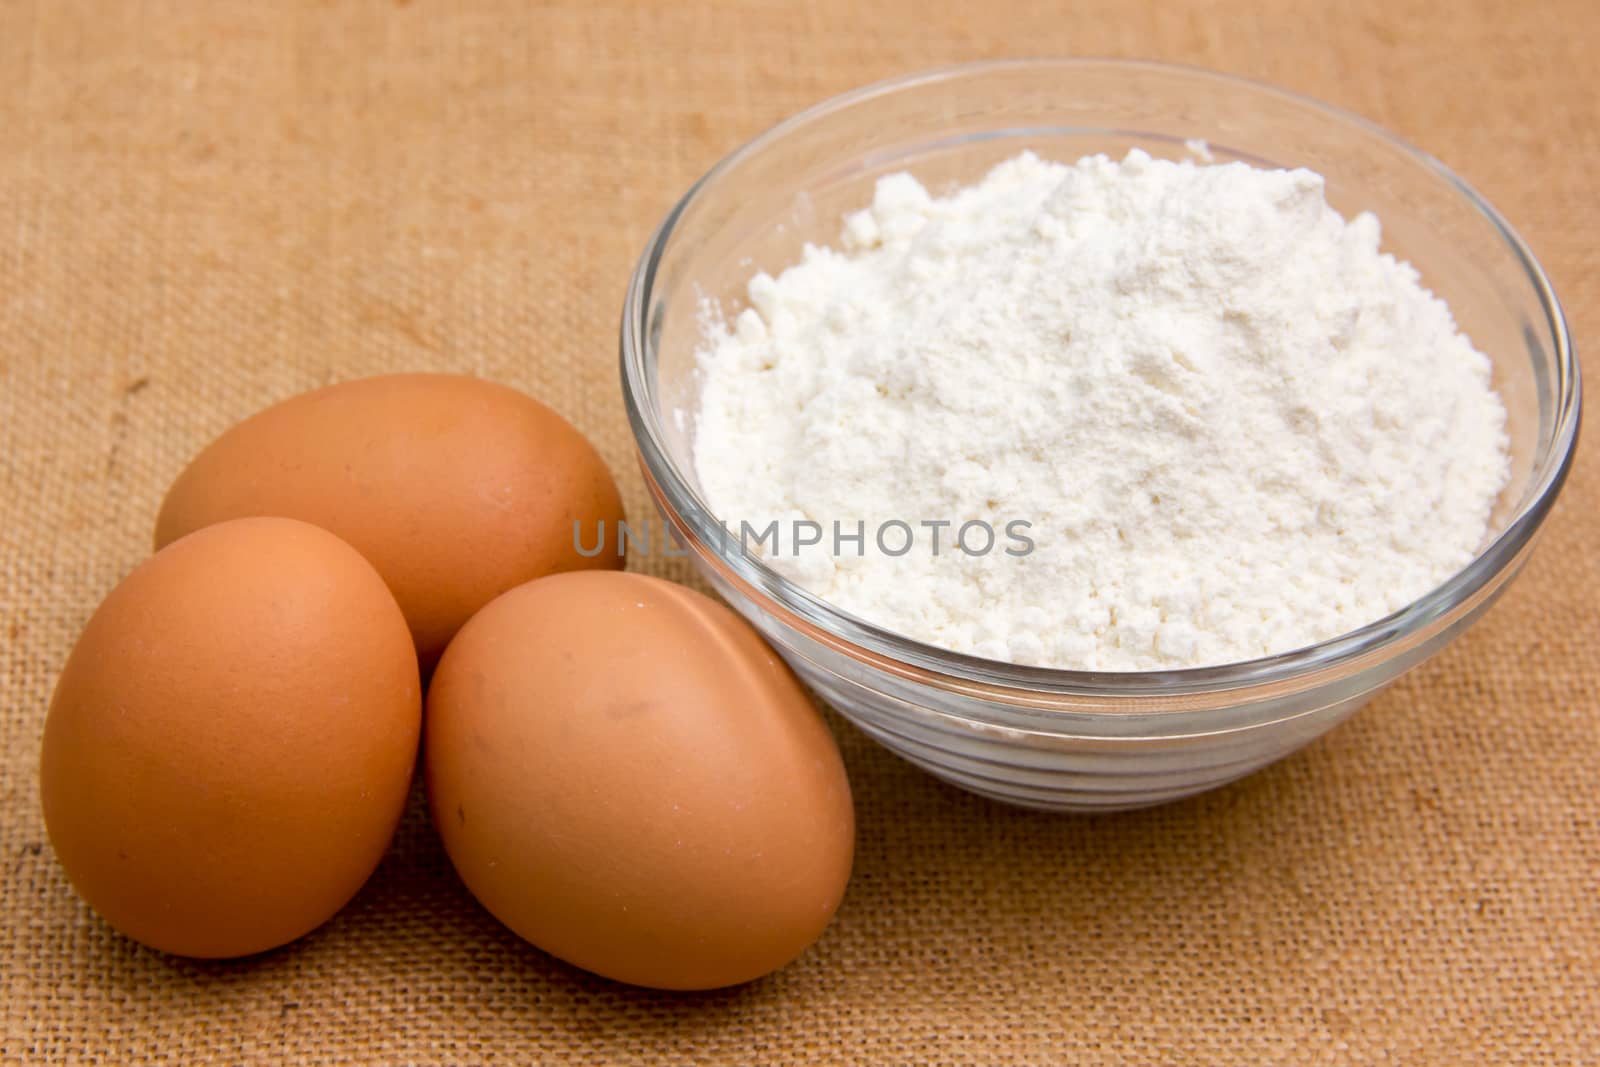 Eggs and flour in bowl on jute cloth